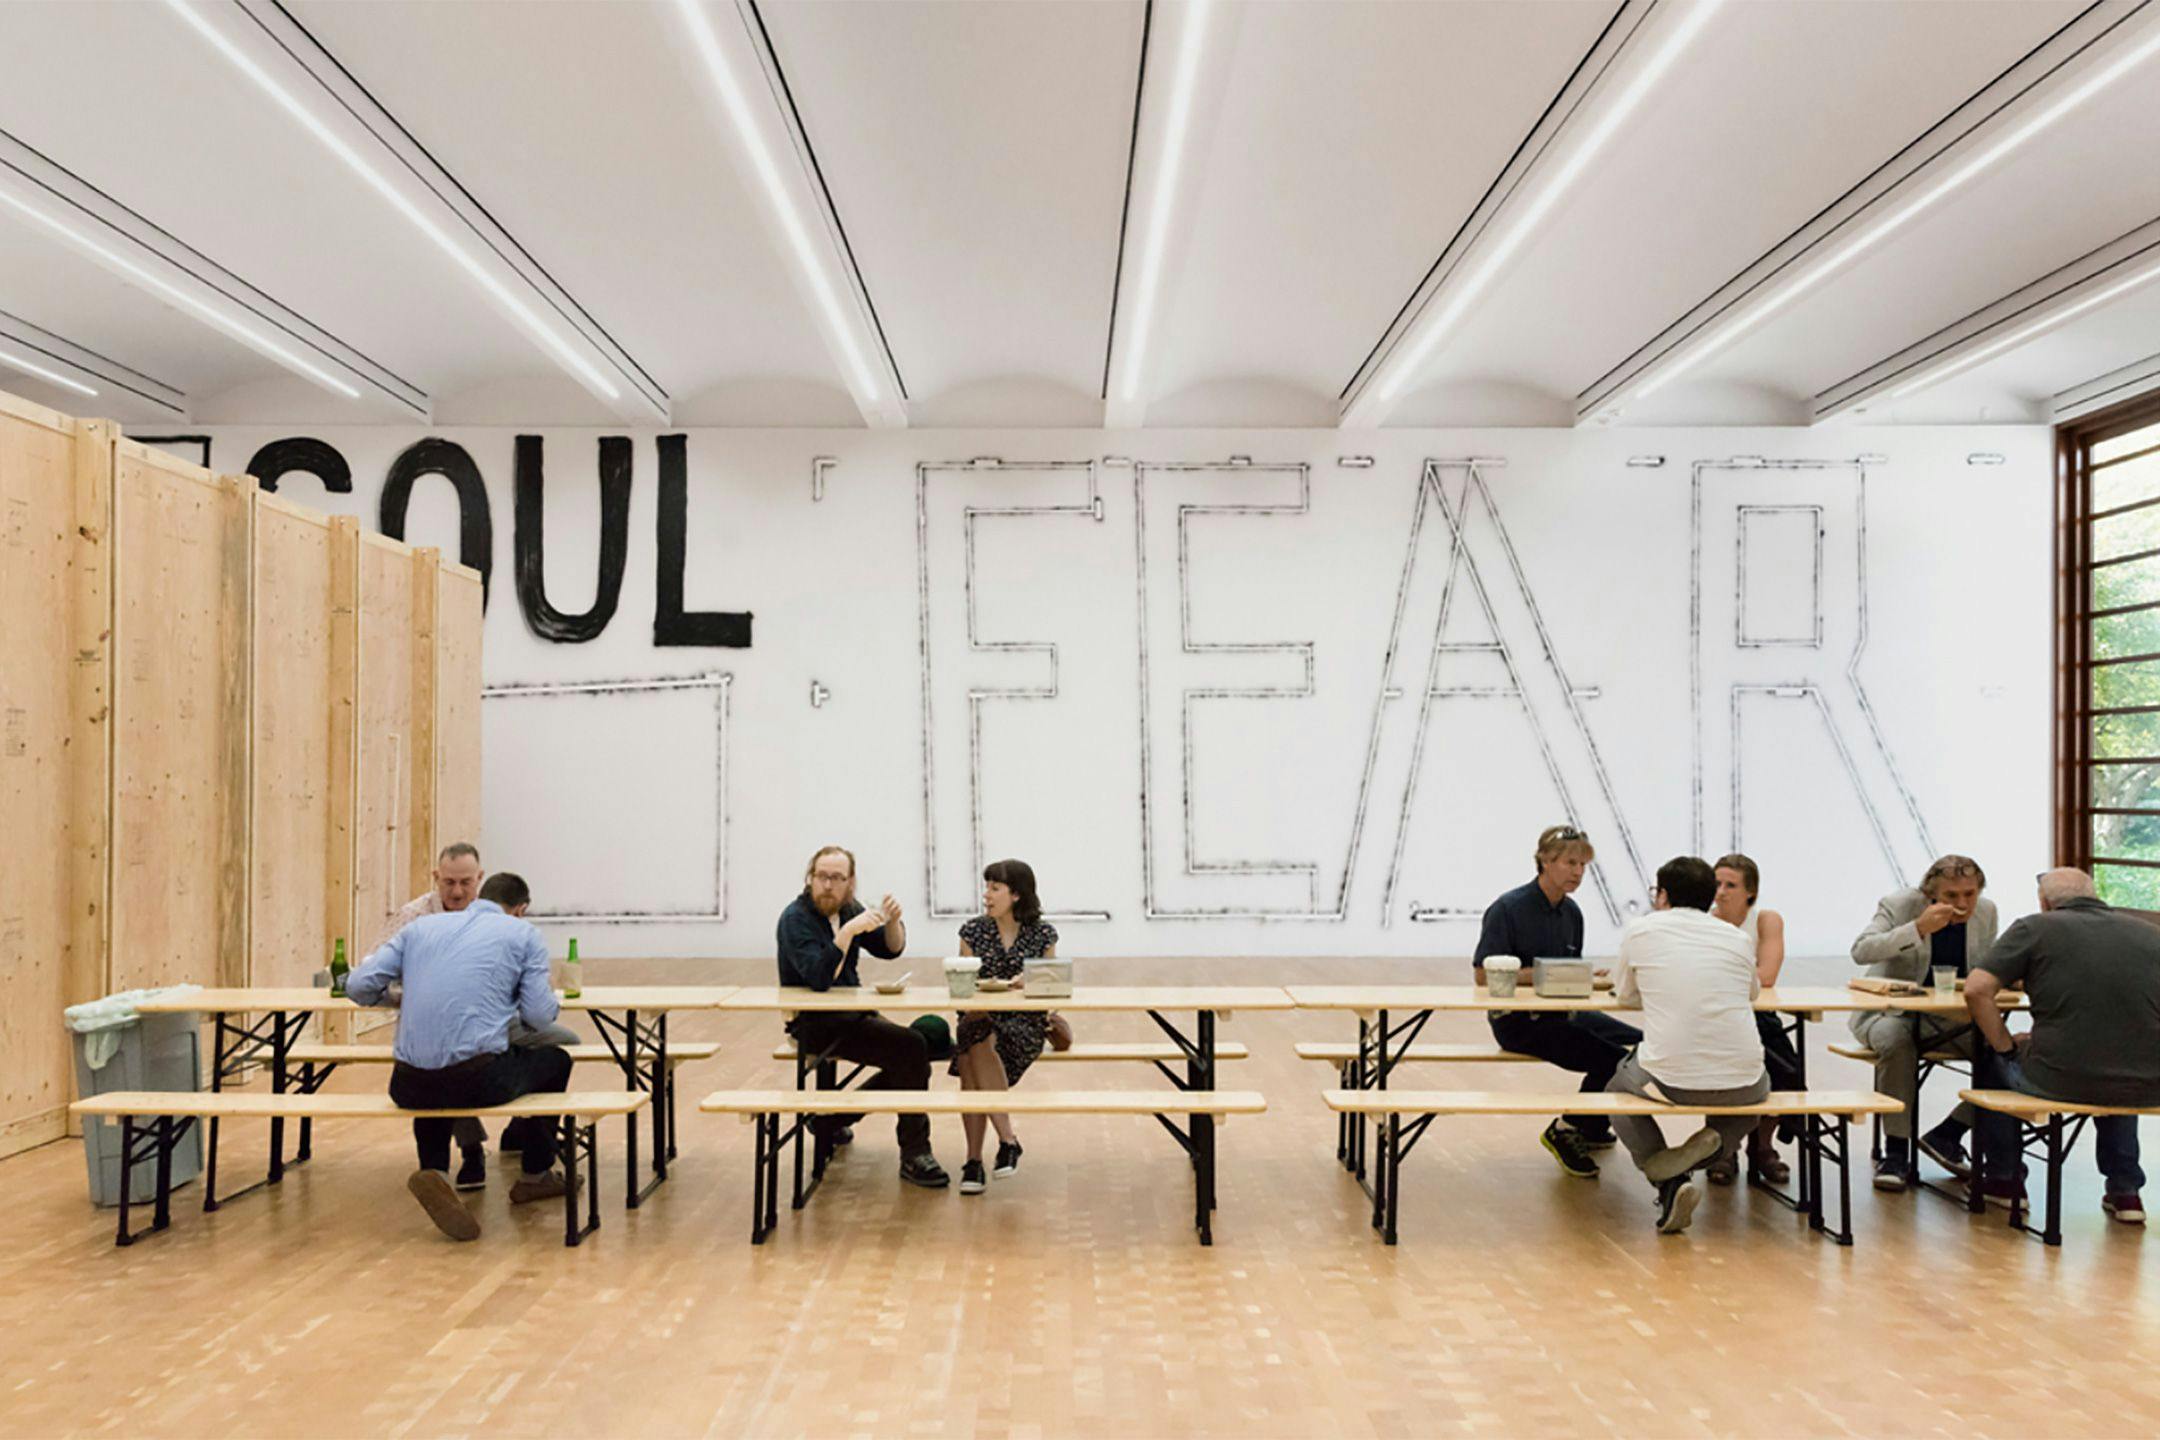 An installation view of viewers interacting within the exhibition Fear eats the soul at Glenstone, dated 2019 to 2020.